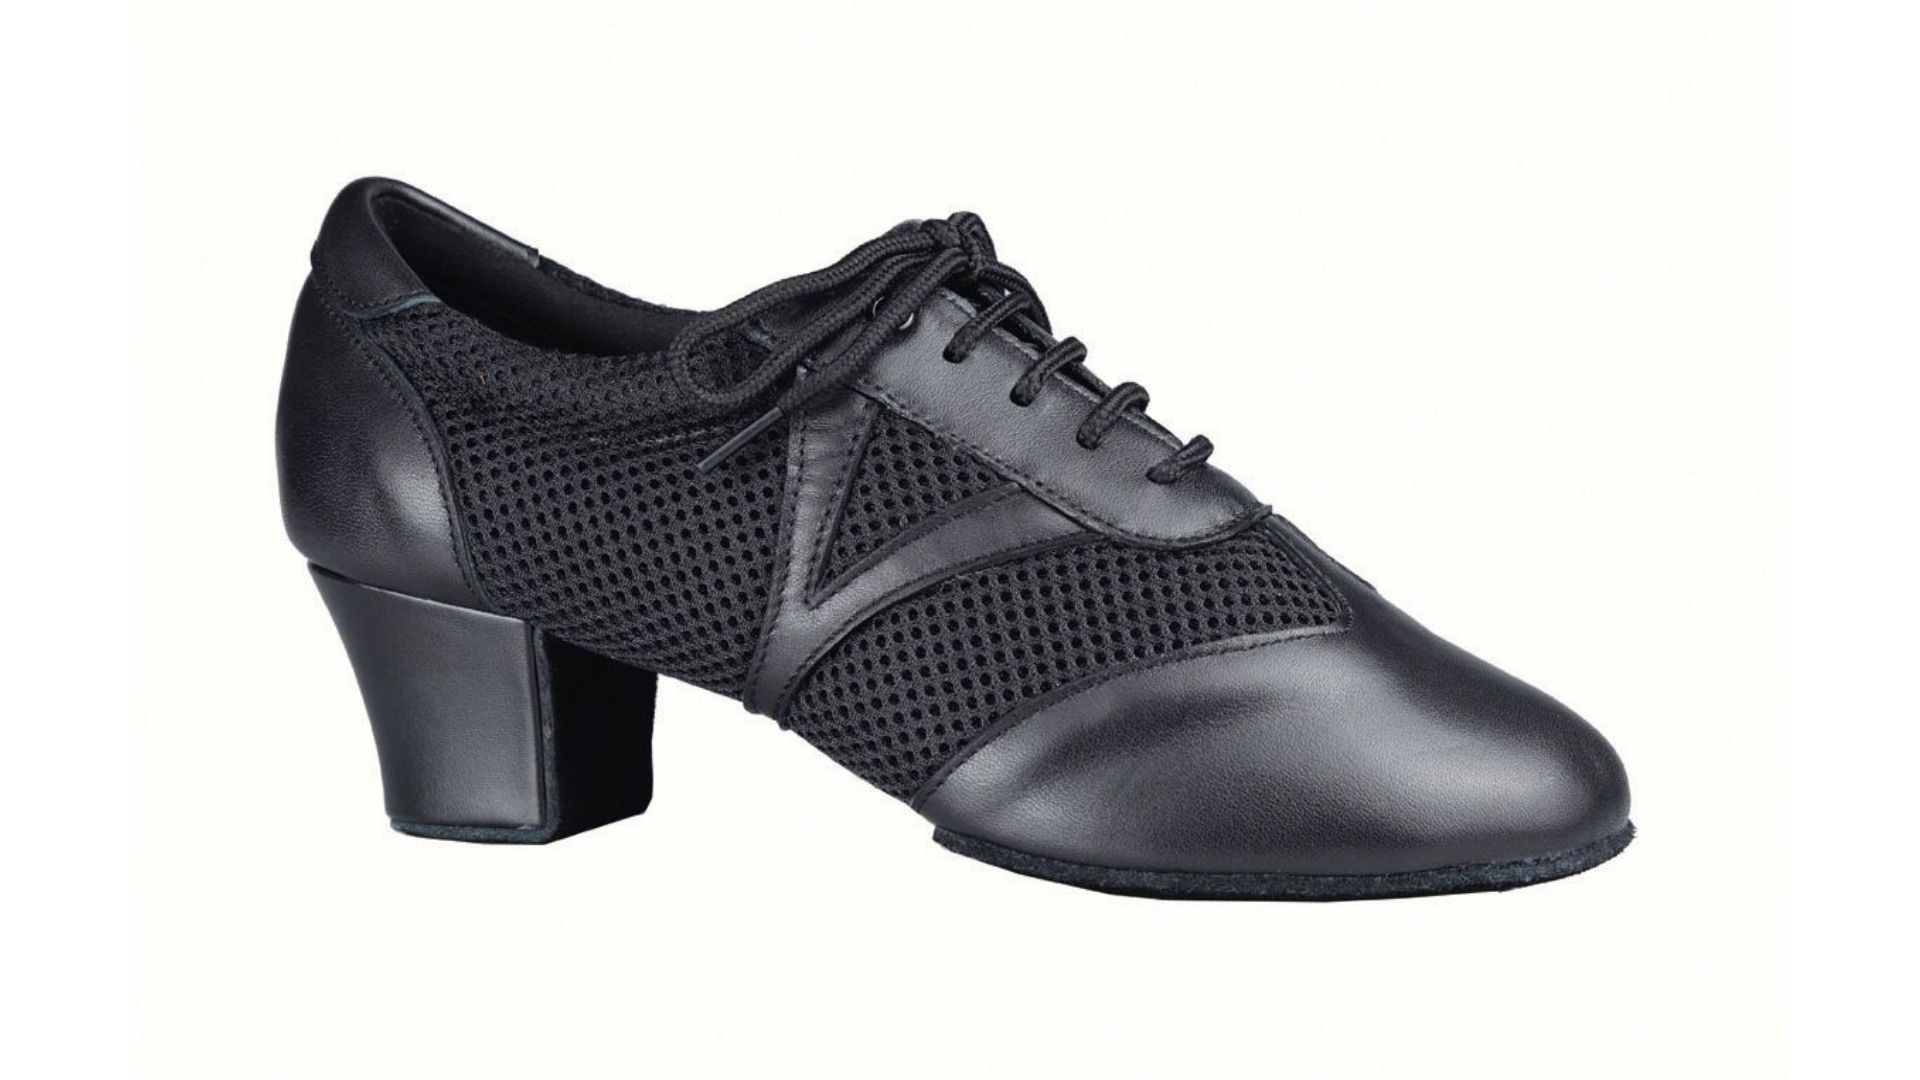 Image for the blog: Your Guide to the Best Ballroom Dance Shoes